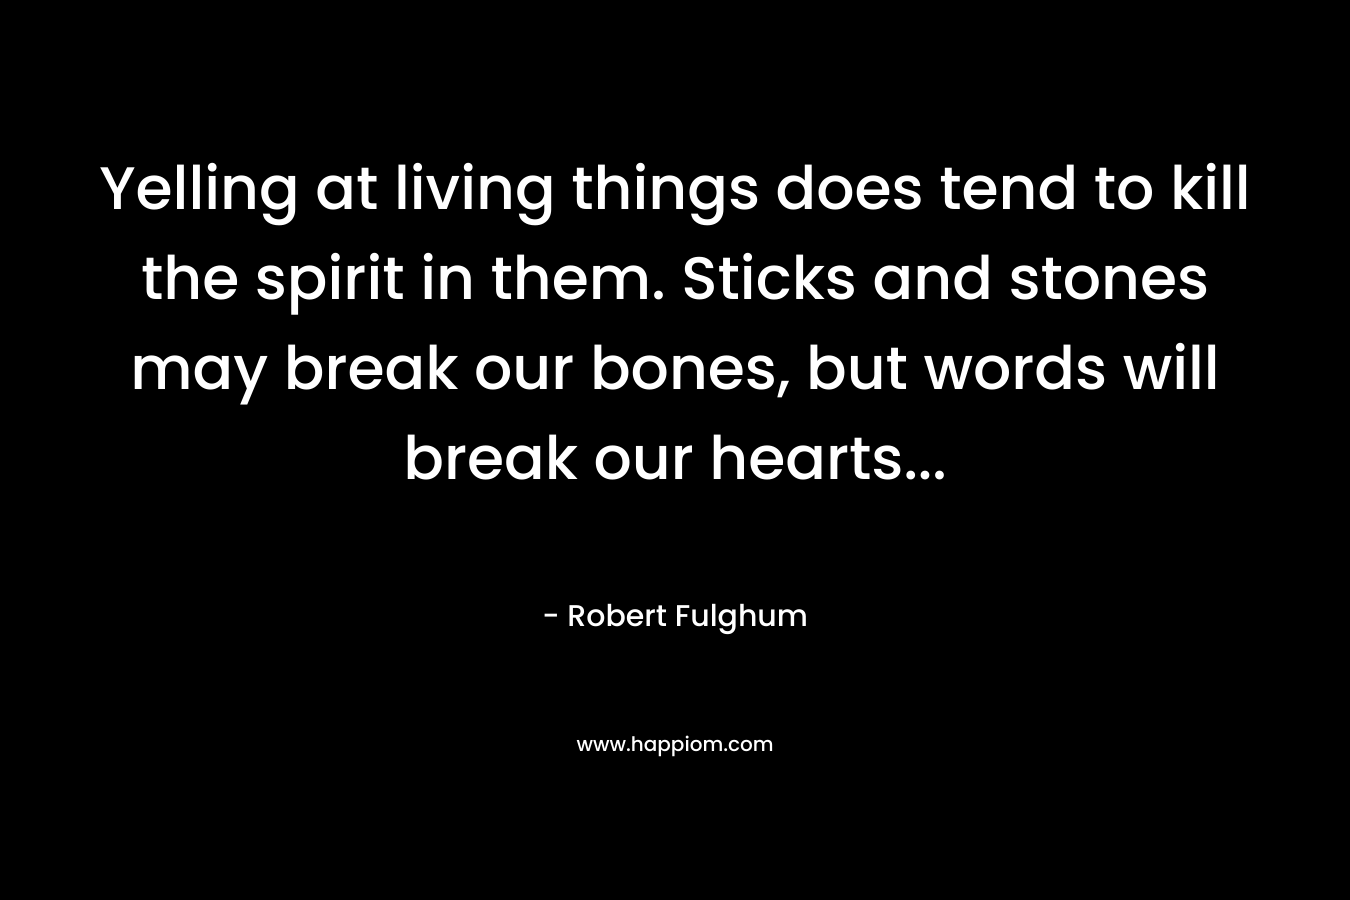 Yelling at living things does tend to kill the spirit in them. Sticks and stones may break our bones, but words will break our hearts… – Robert Fulghum